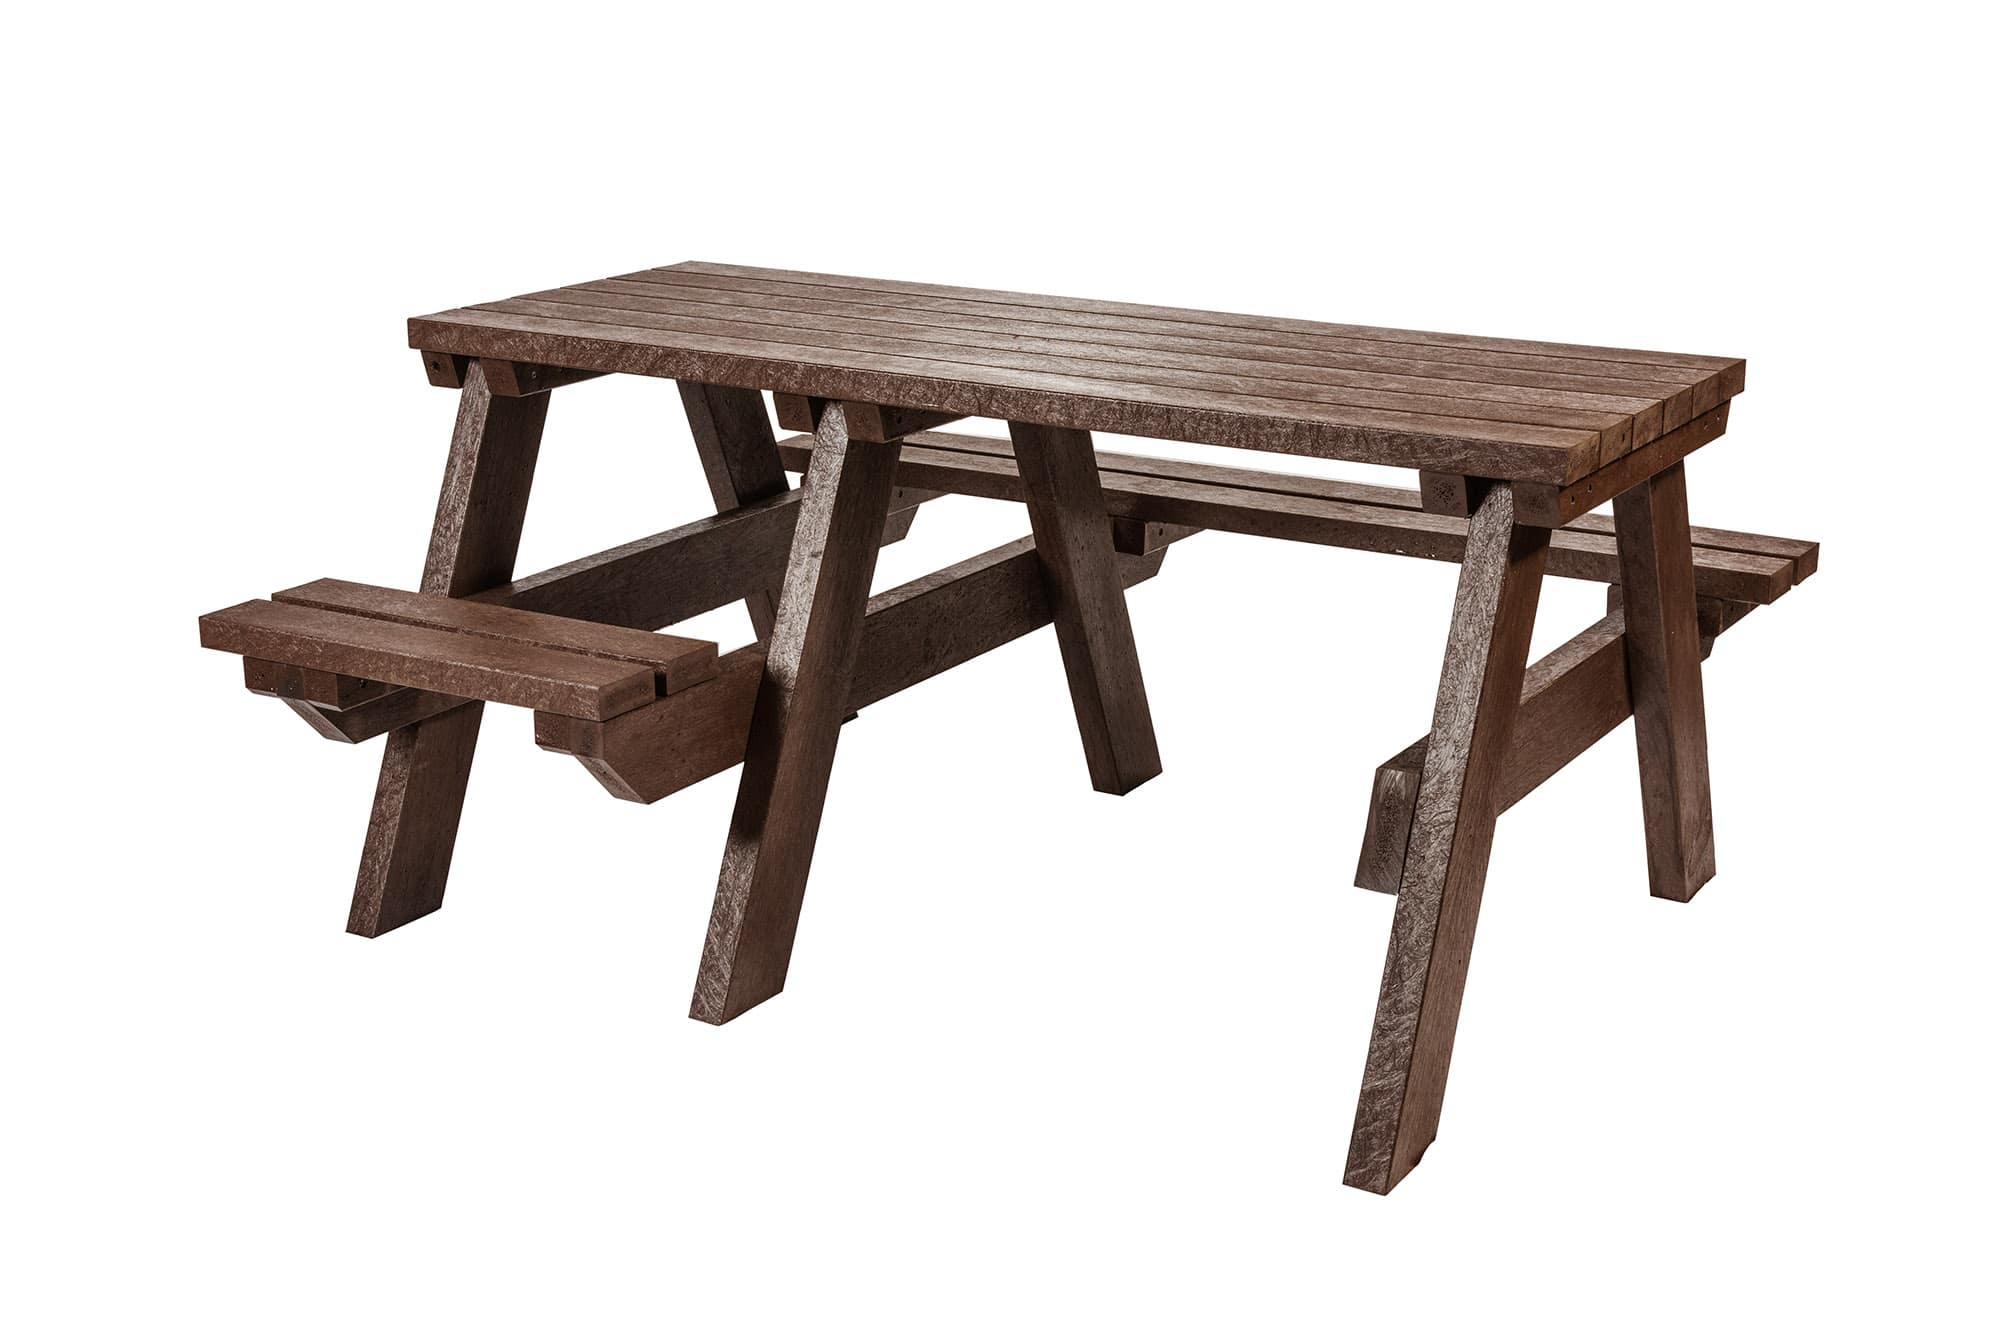 The Bradshaw recycled plastic wheelchair accessible picnic table in brown